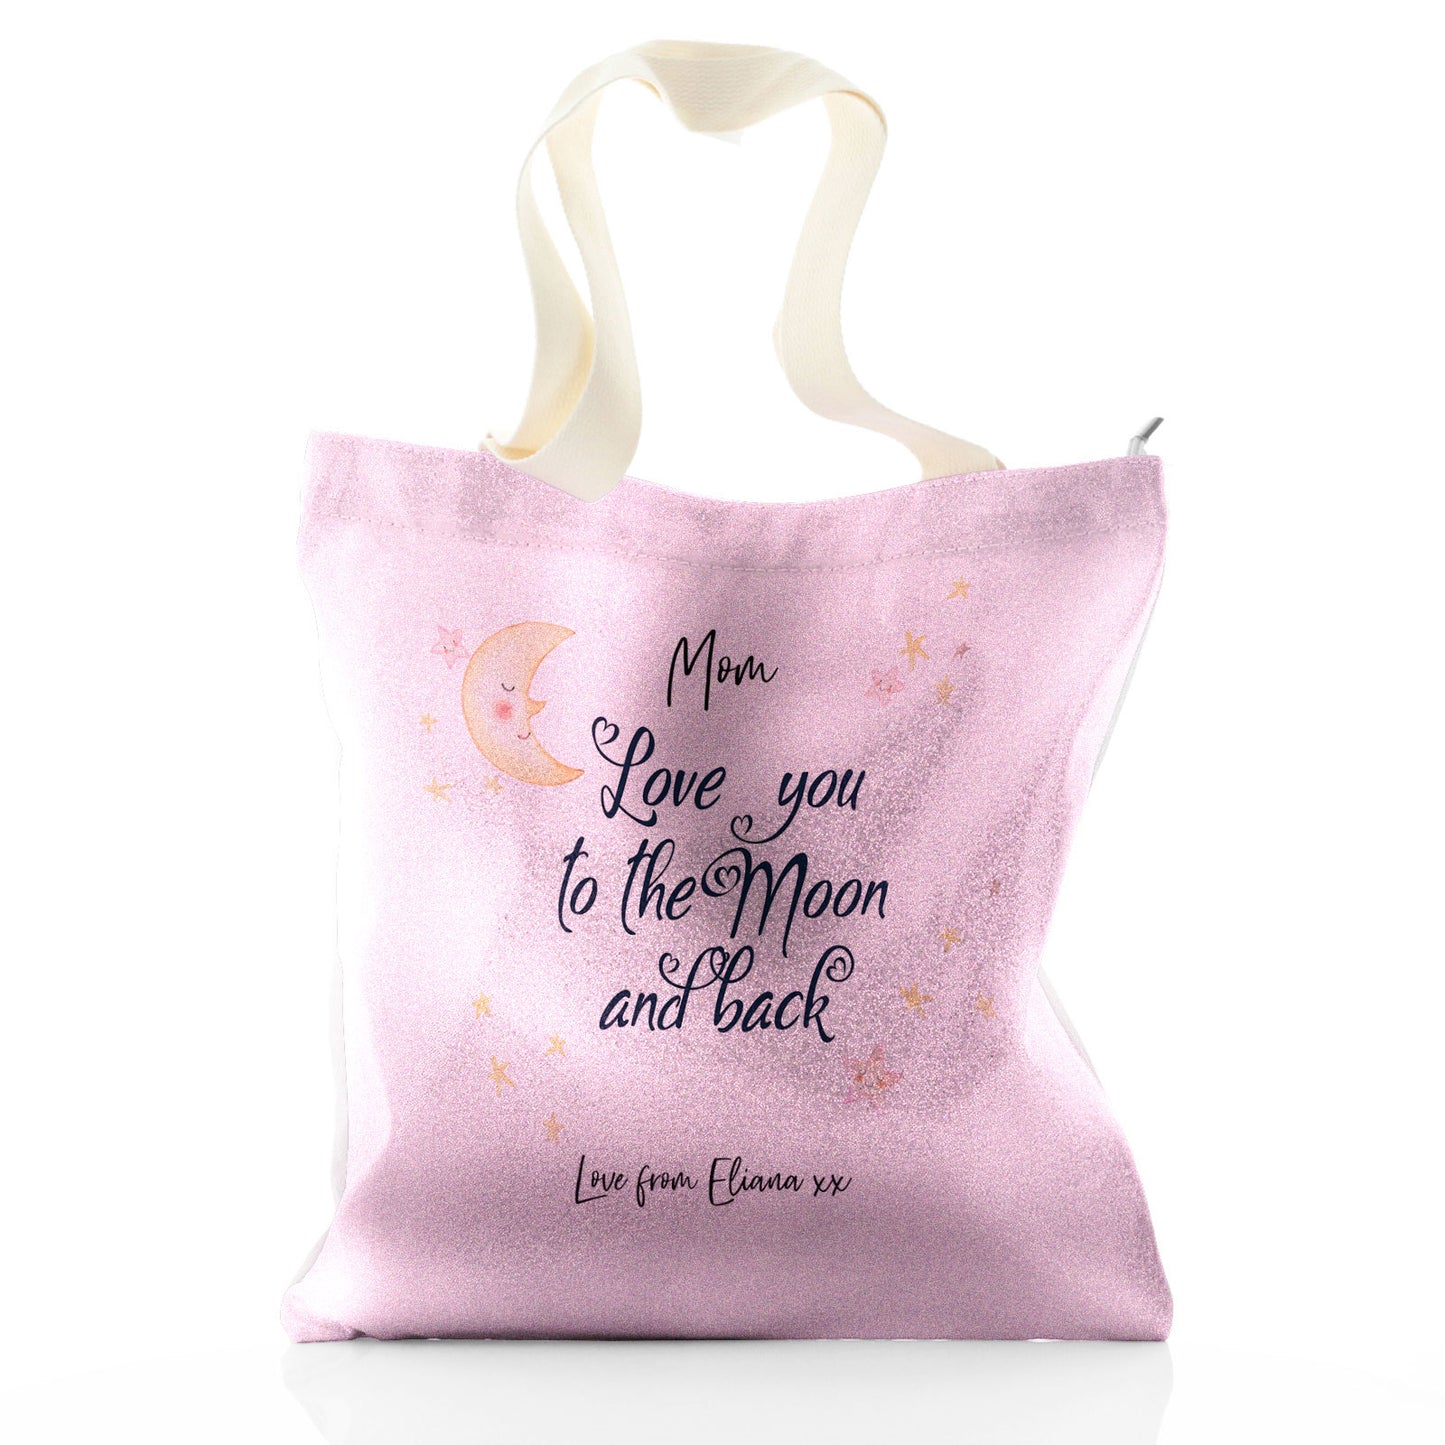 Personalised Glitter Tote Bag with Stylish Text and Moon Love Message